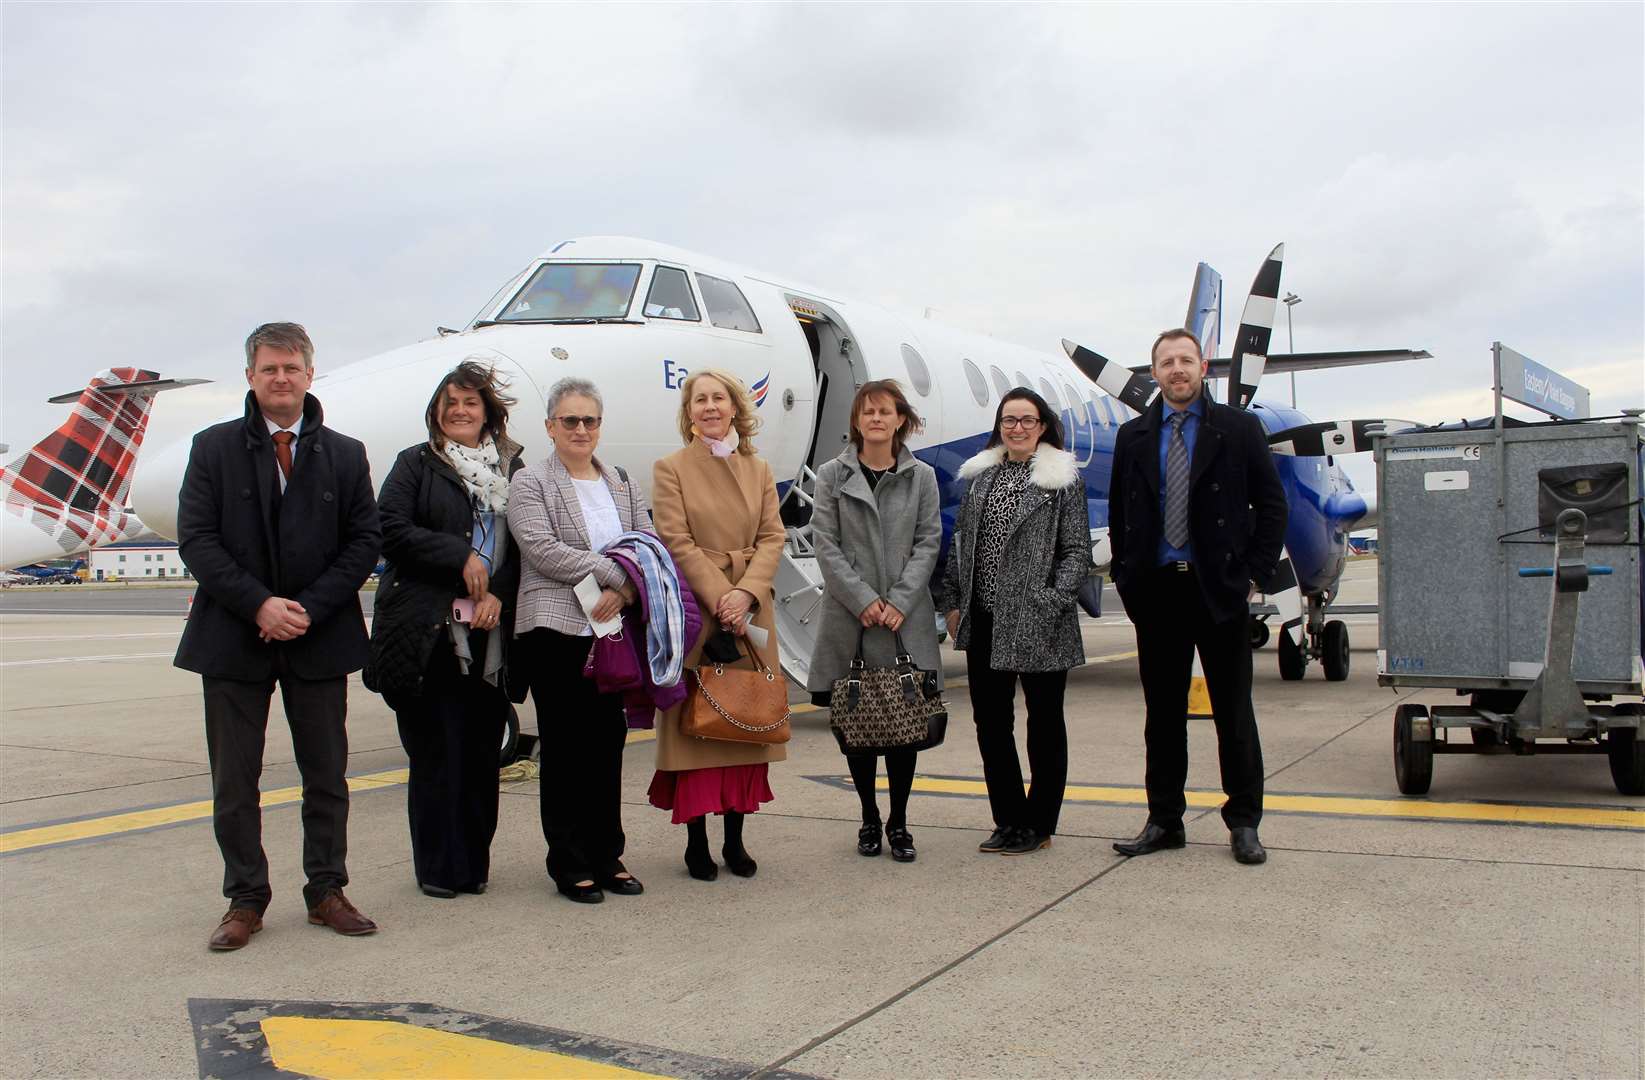 Preparing to board at Aberdeen Airport are, from left, Dougie Cook (HIAL), Lorna Jack (HIAL), Trudy Morris (Caithness Chamber of Commerce), Ellie Lamont (Venture North), Louise Sinclair (Caithness Chamber of Commerce), Marion Reid (Caithness Chamber of Commerce) and Gordon Duncan (Highland Council). Picture: Alan Hendry